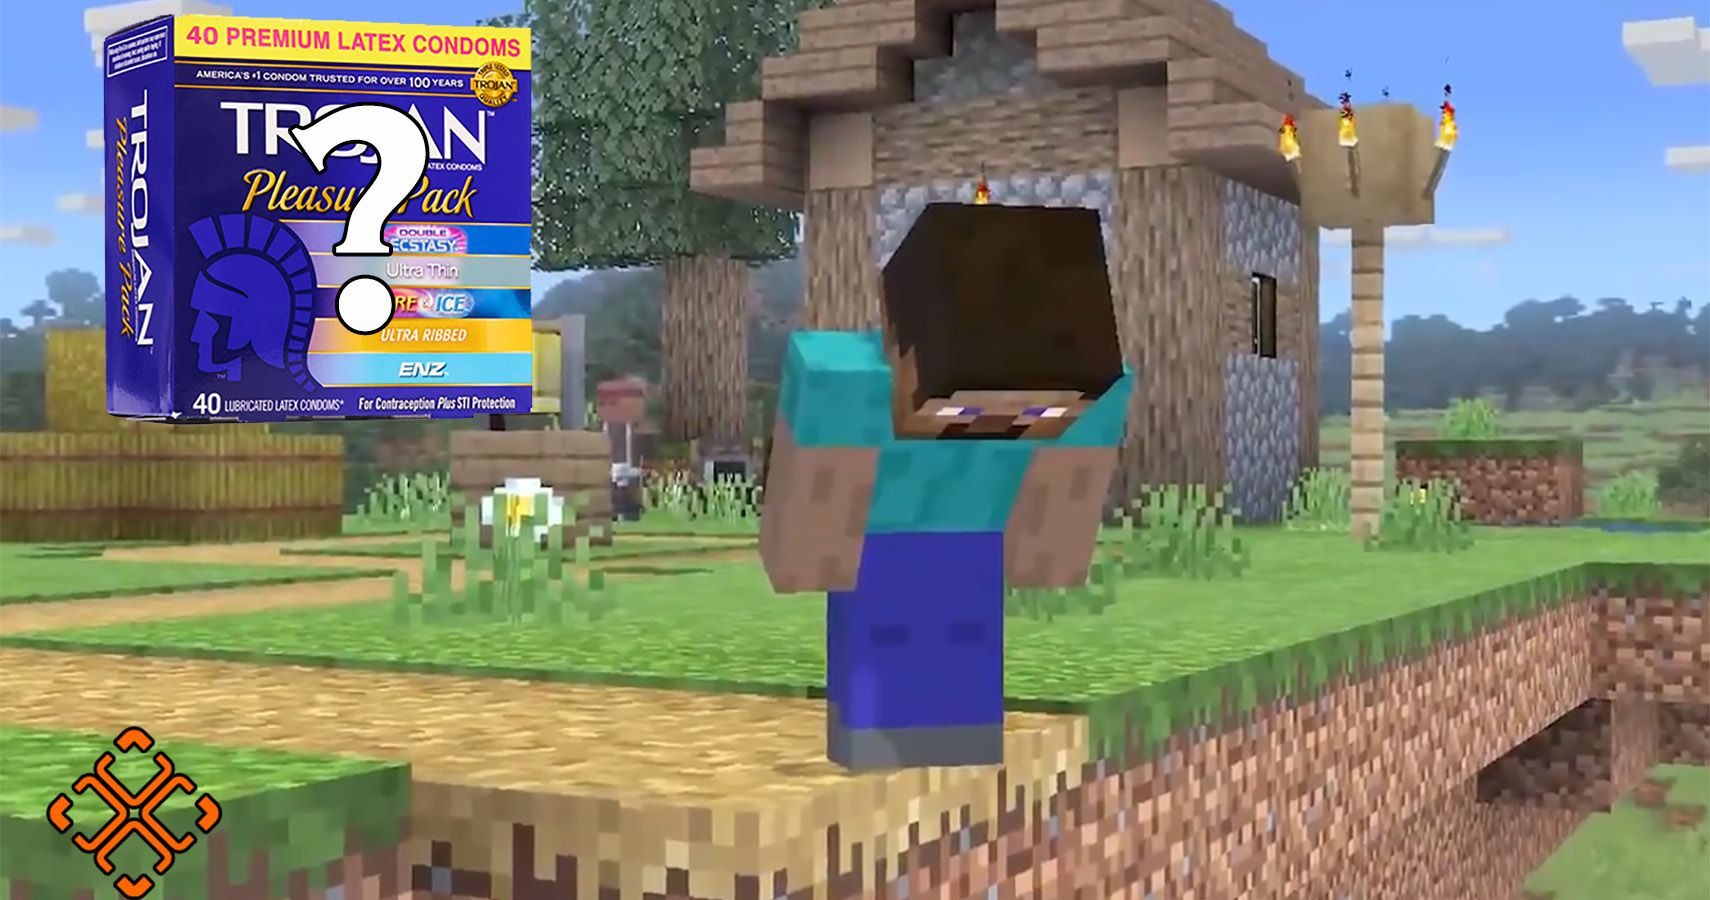 Minecraft Steve in Super Smash Bros with Trojan box and question mark